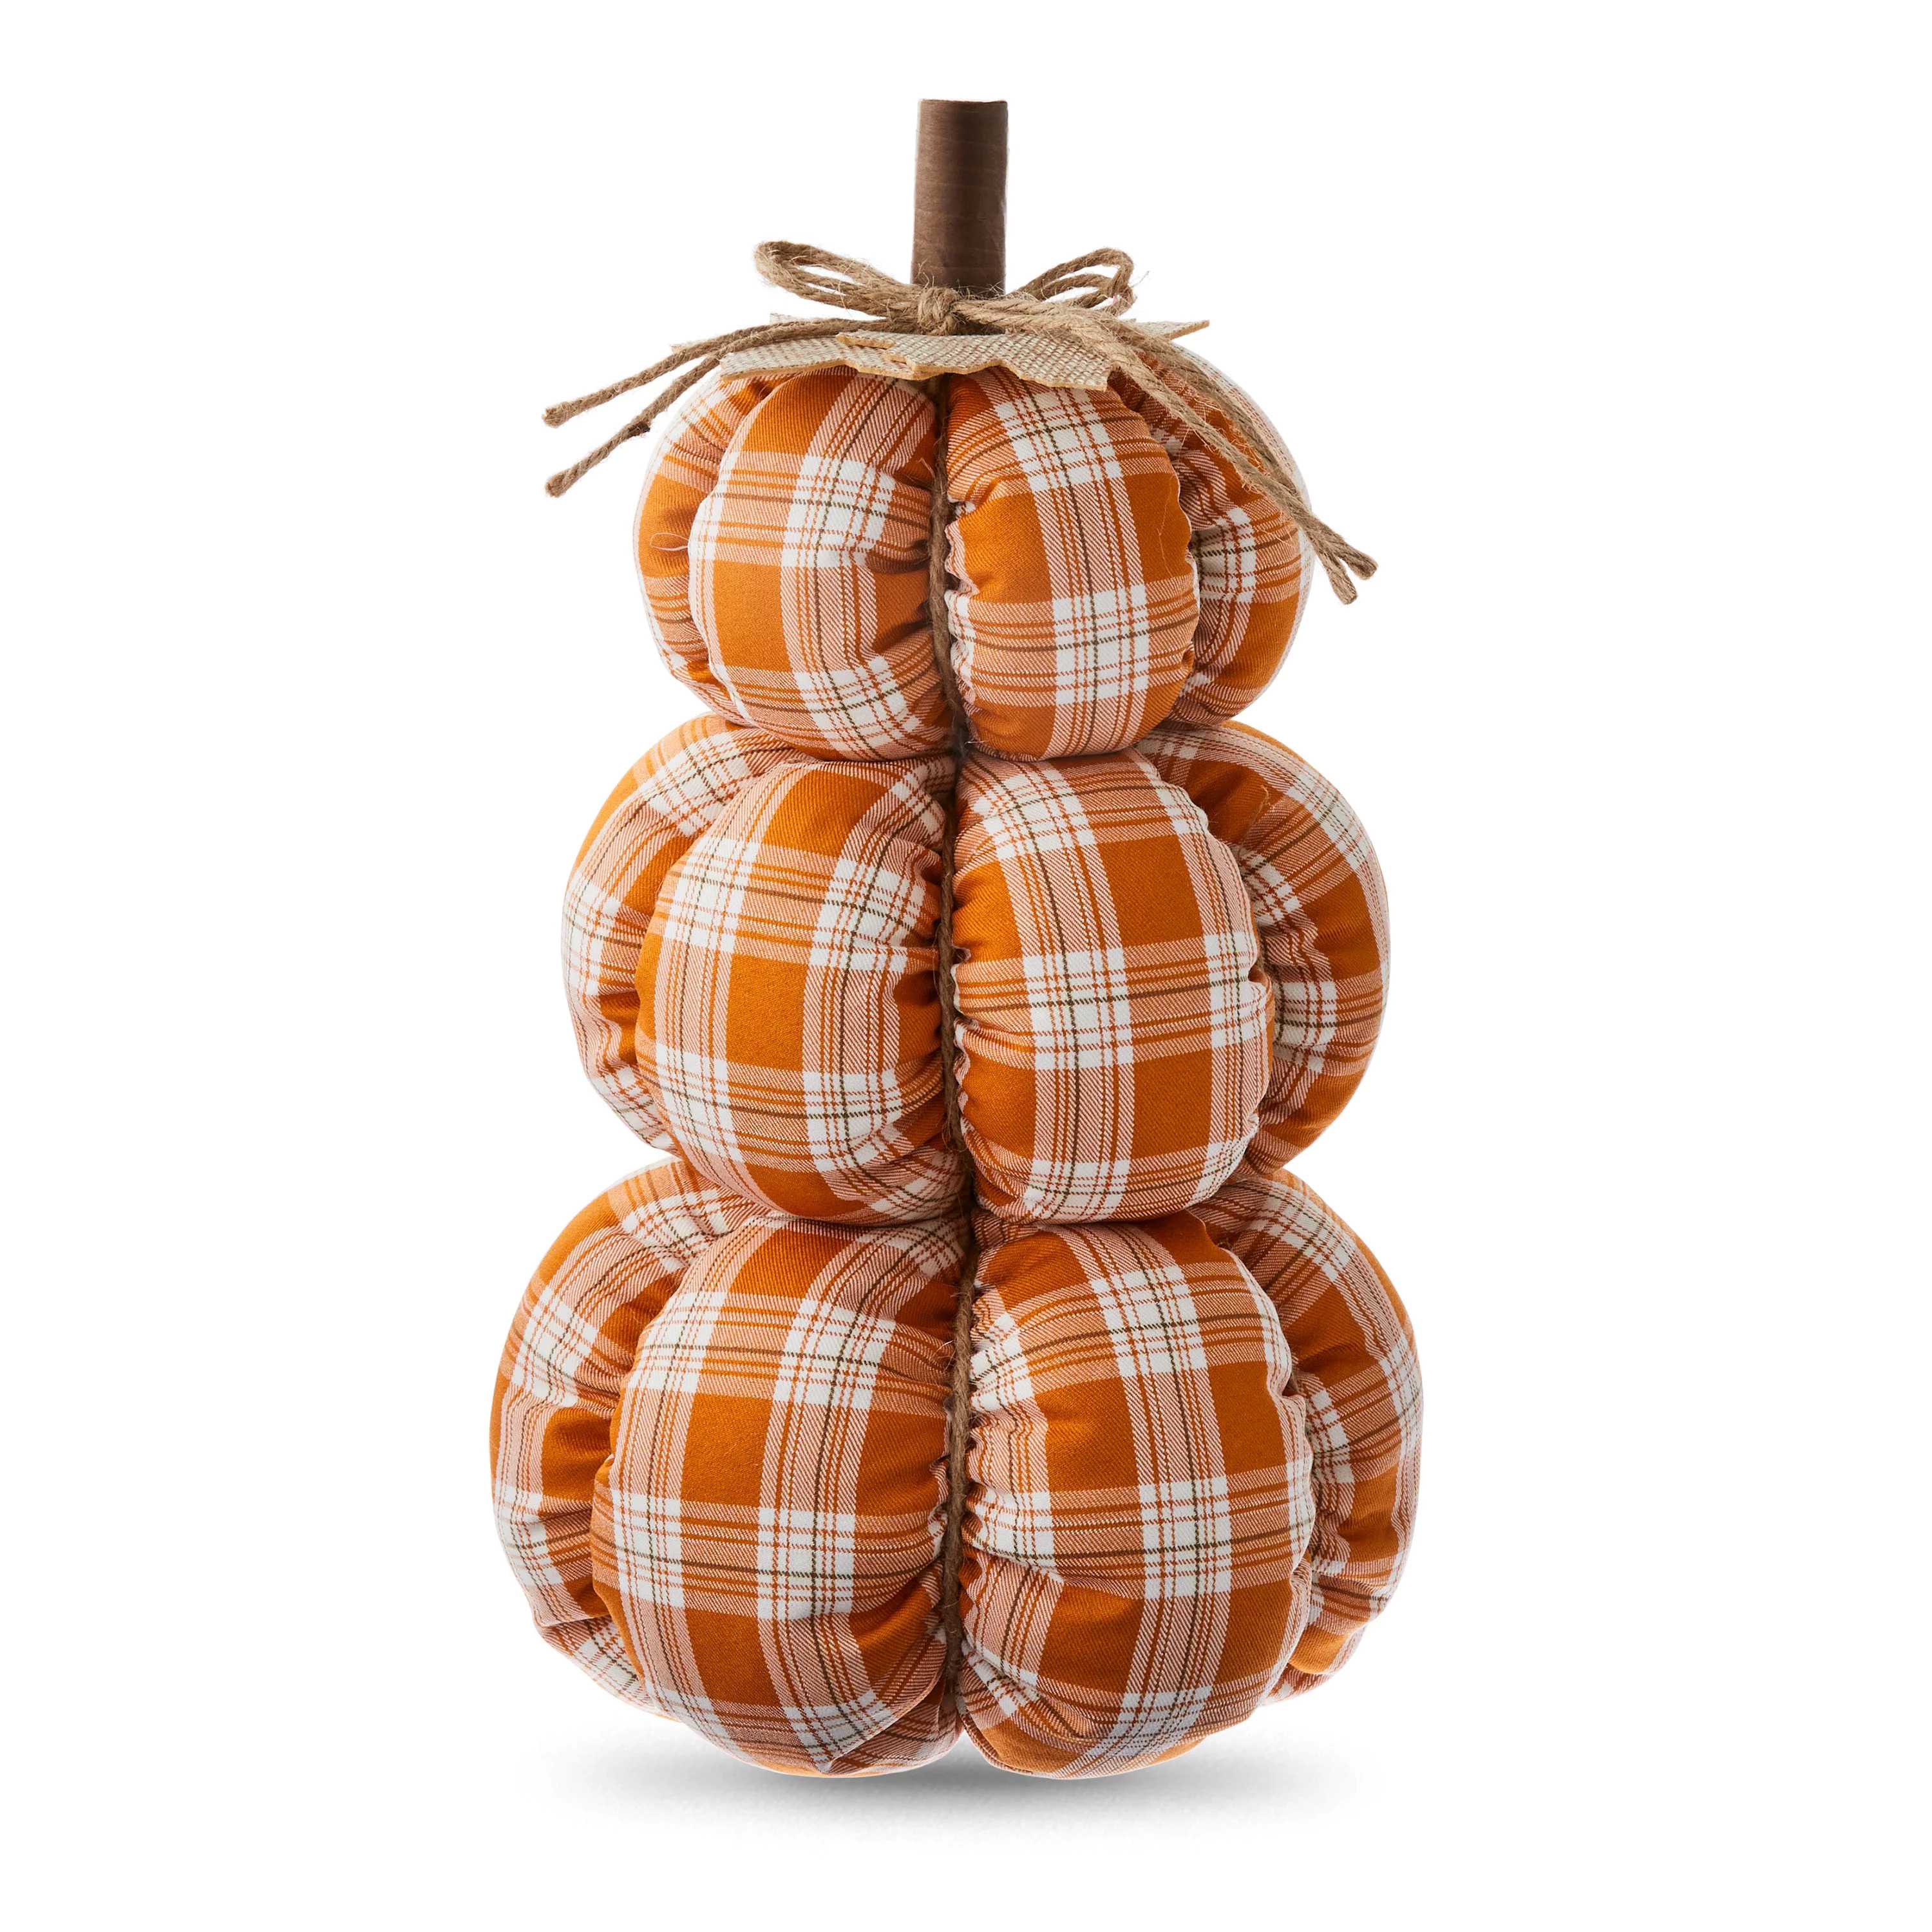 The fabric pumpkin stack